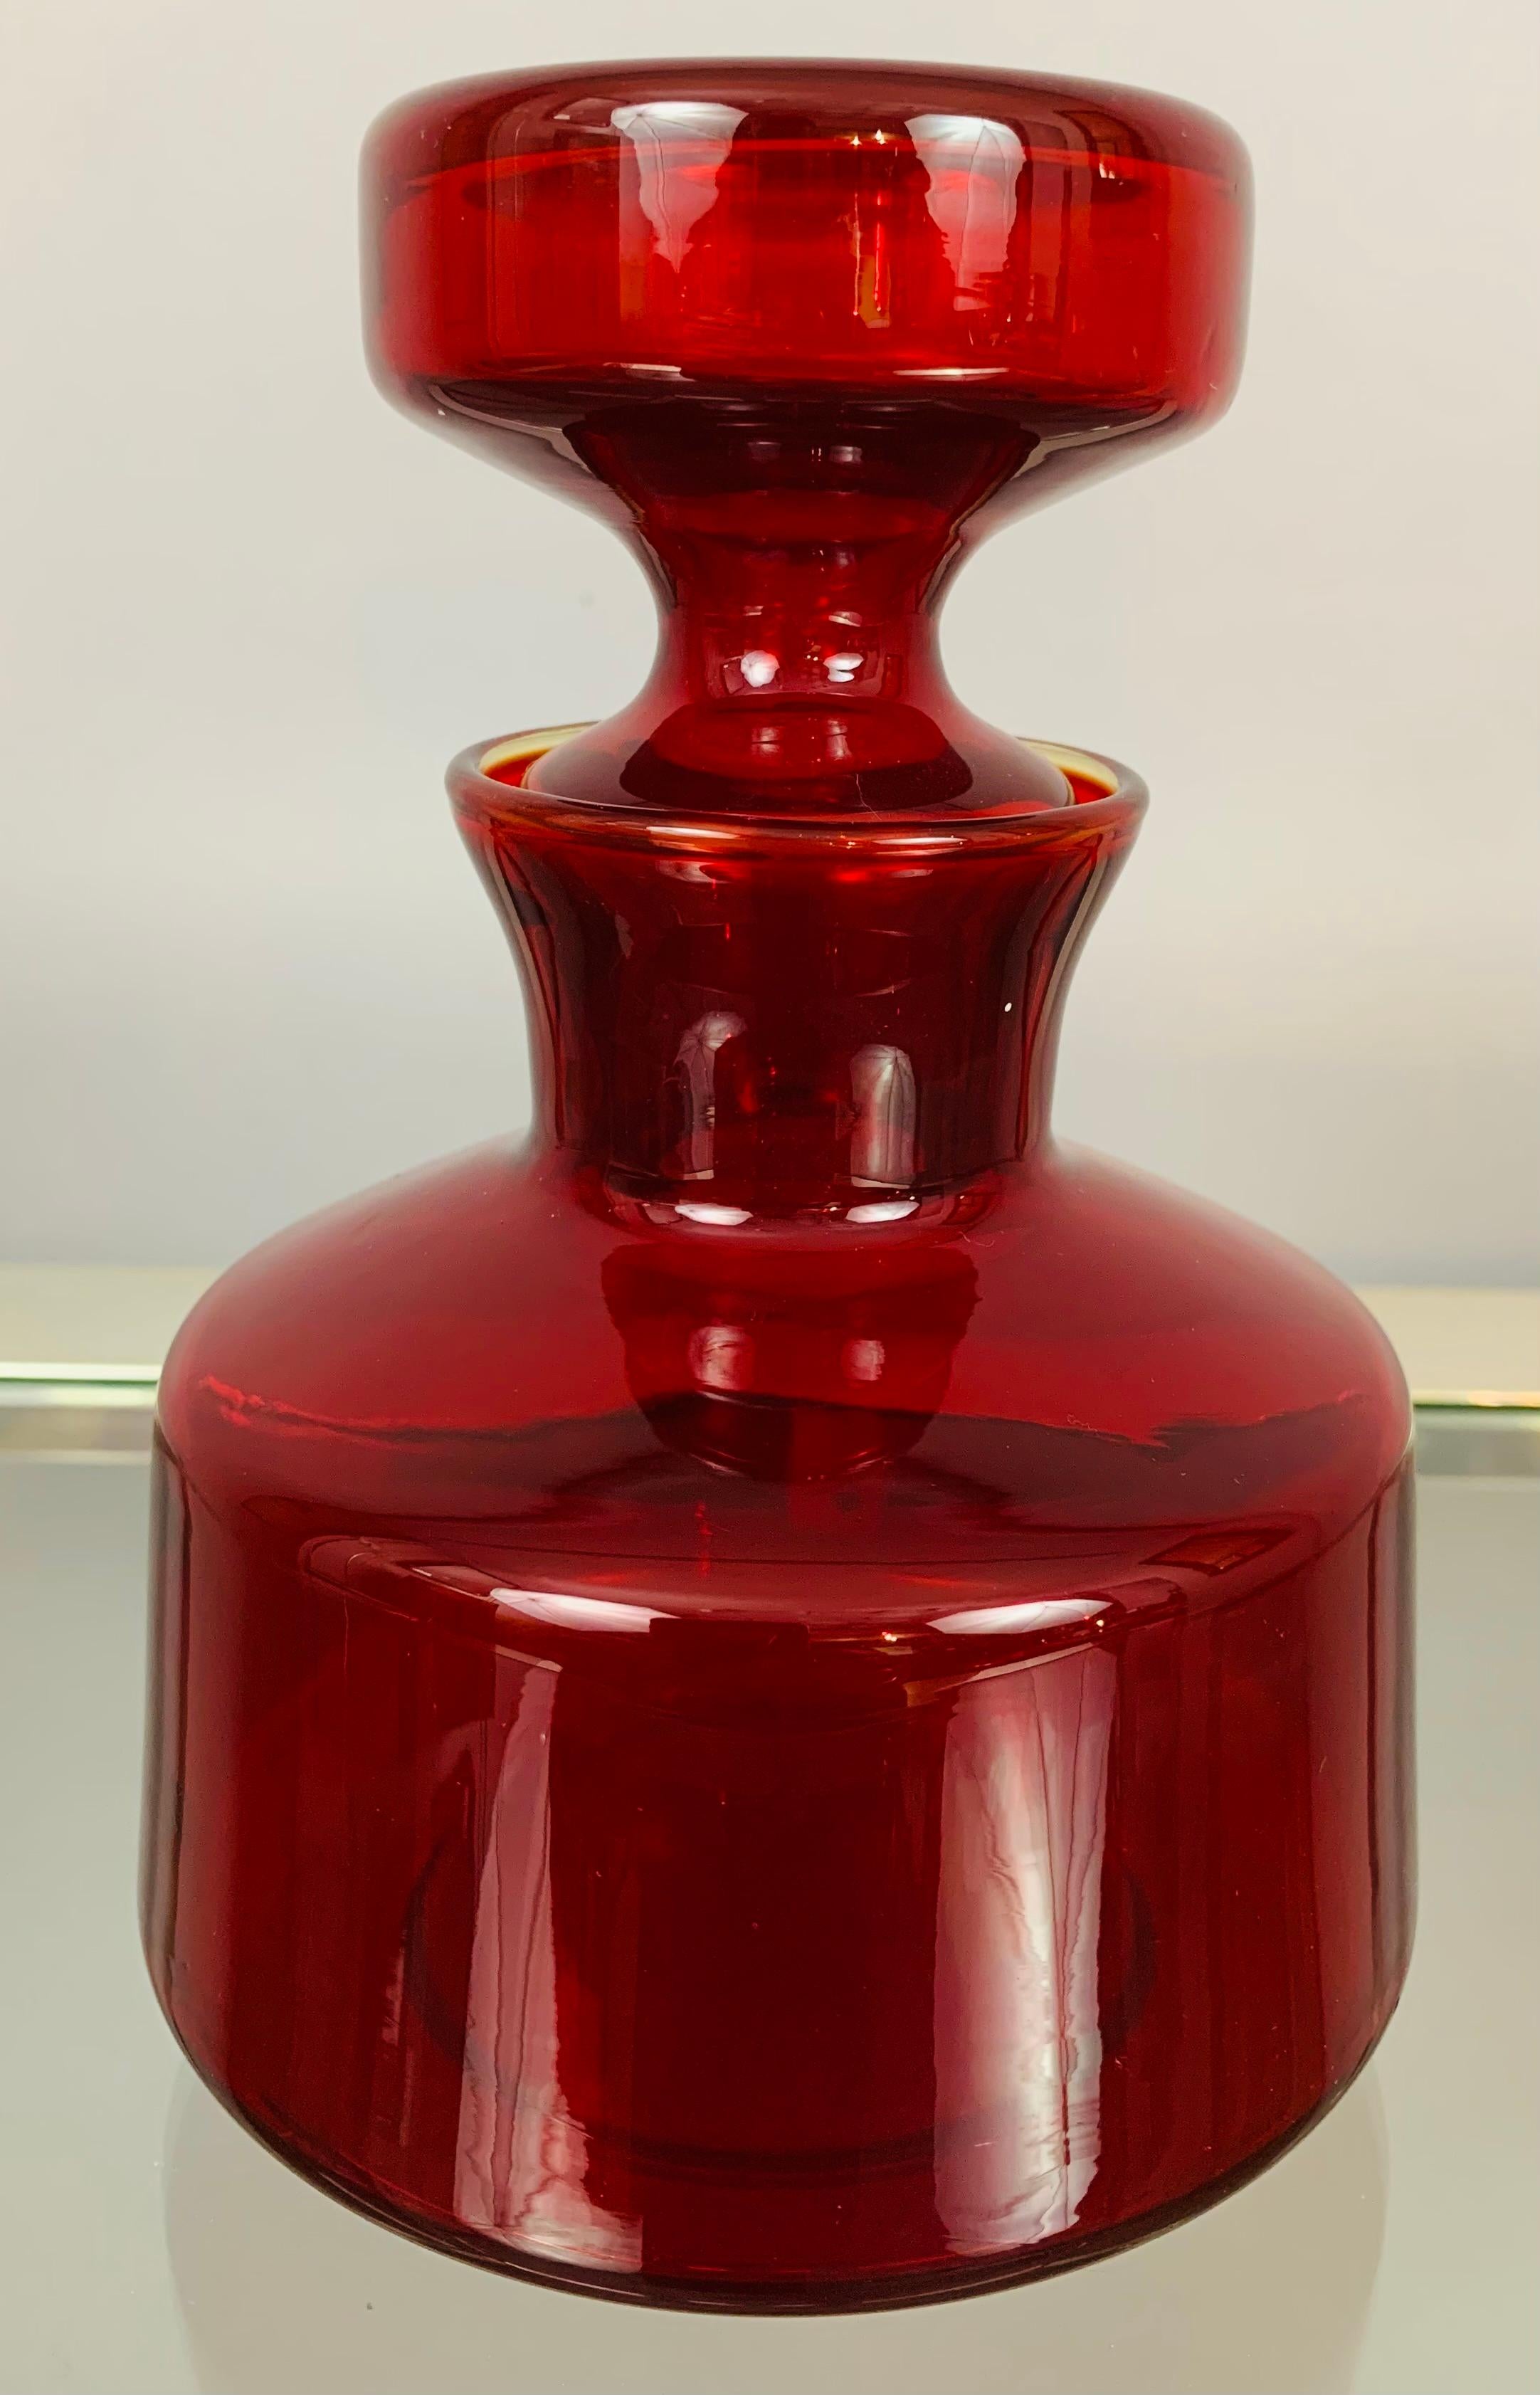 1960s Ruby red glass flask with a decorative stopper in the style of Finnish glassmaker Riihimaki and designer Tamara Aladin. A well-made and functional piece. Beautifully designed and a perfect addition to any glass collection to add some colour